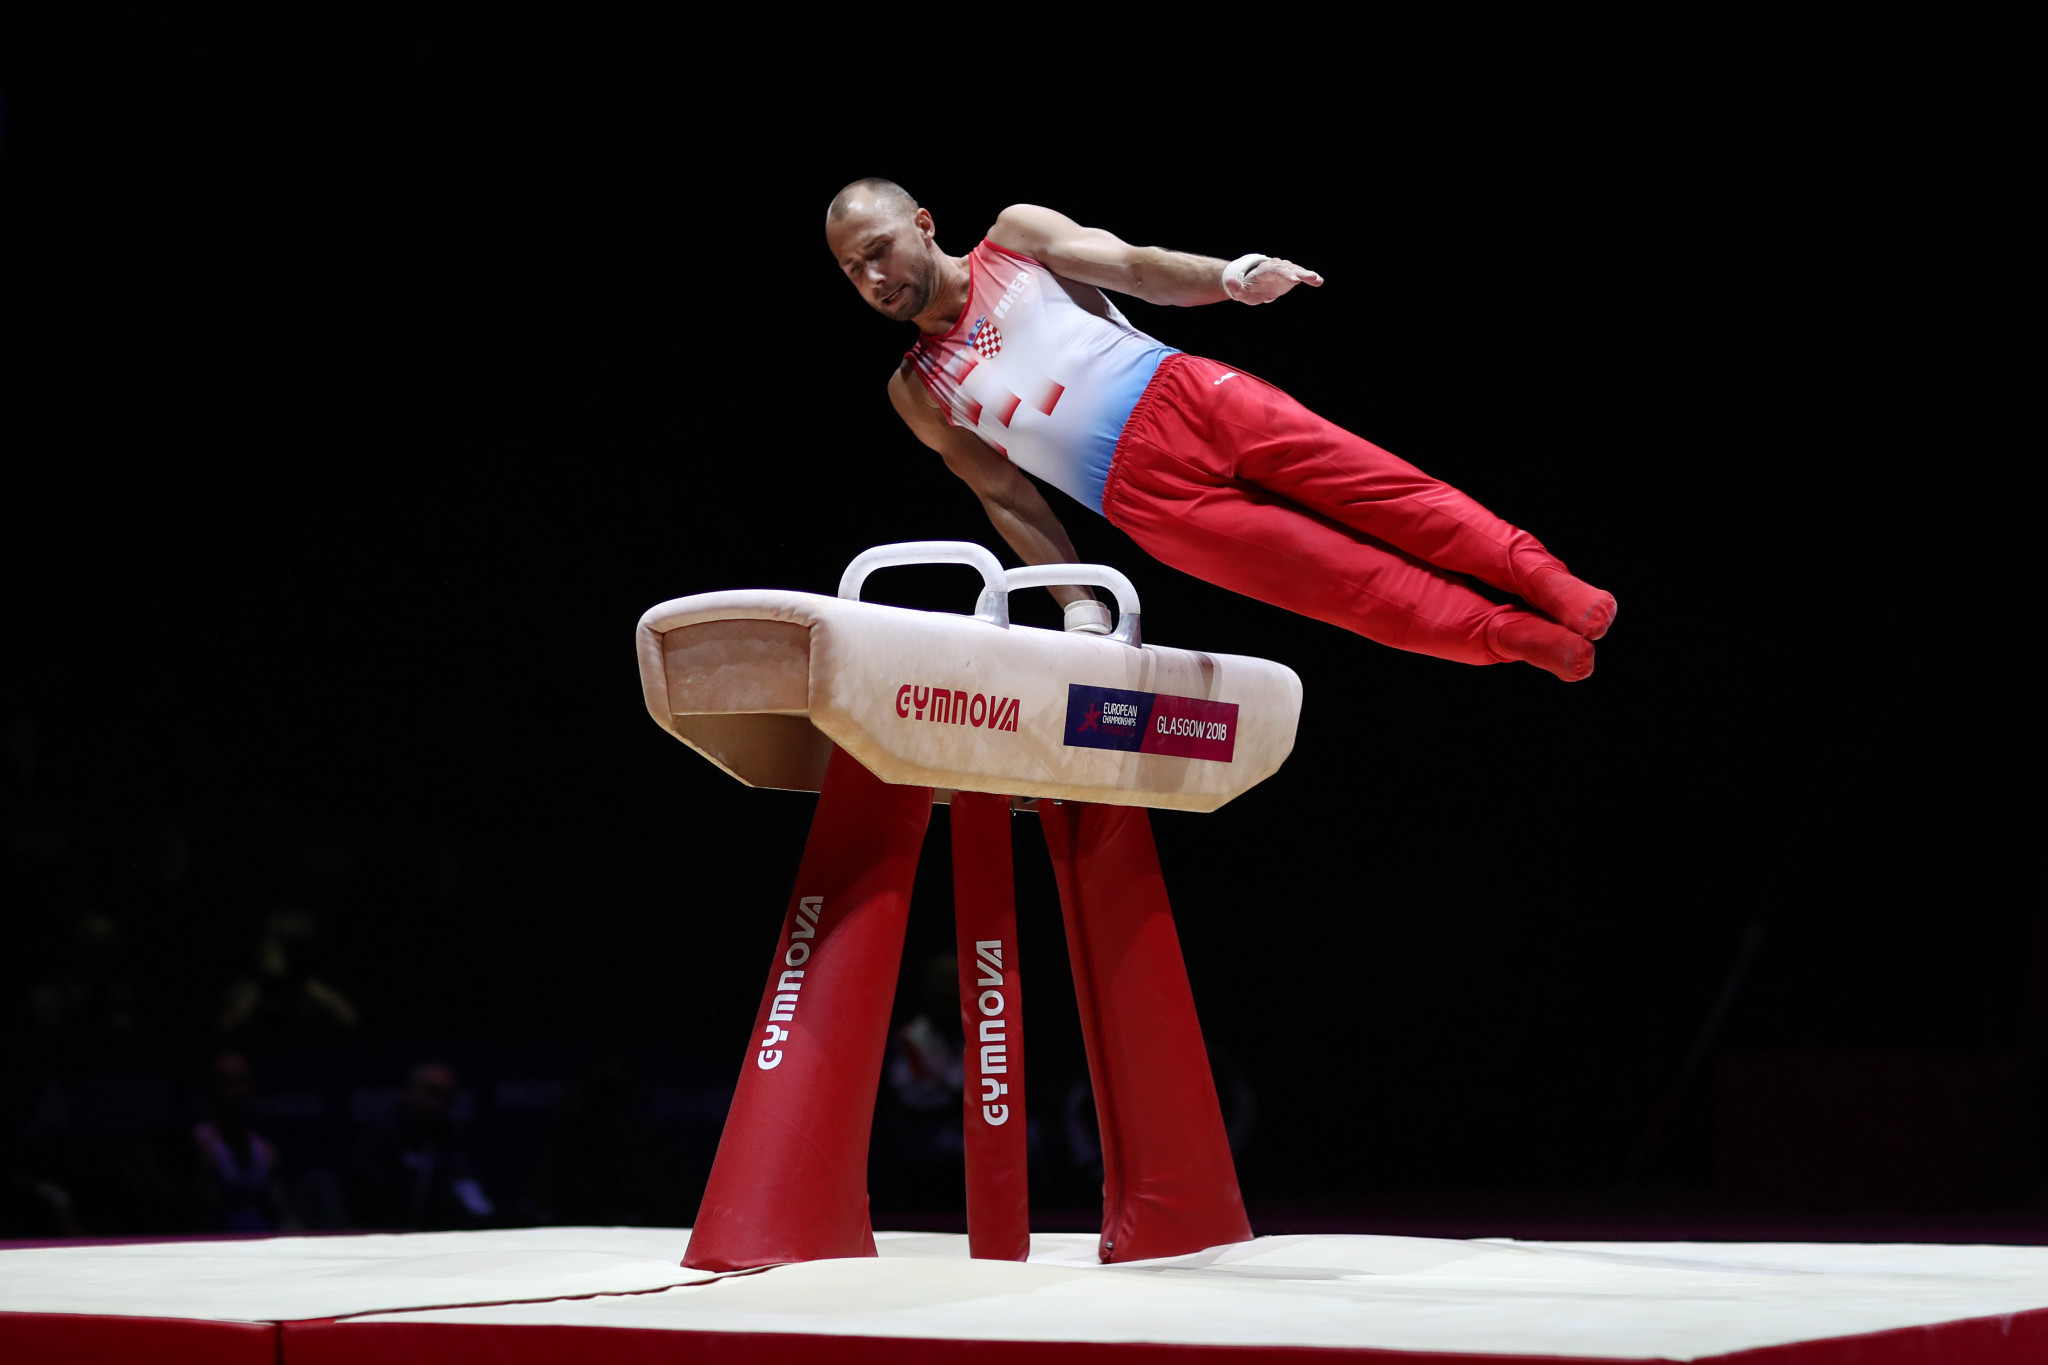 Home athlete Seligman tops men's pommel horse qualification standings at FIG World Challenge Cup in Osijek